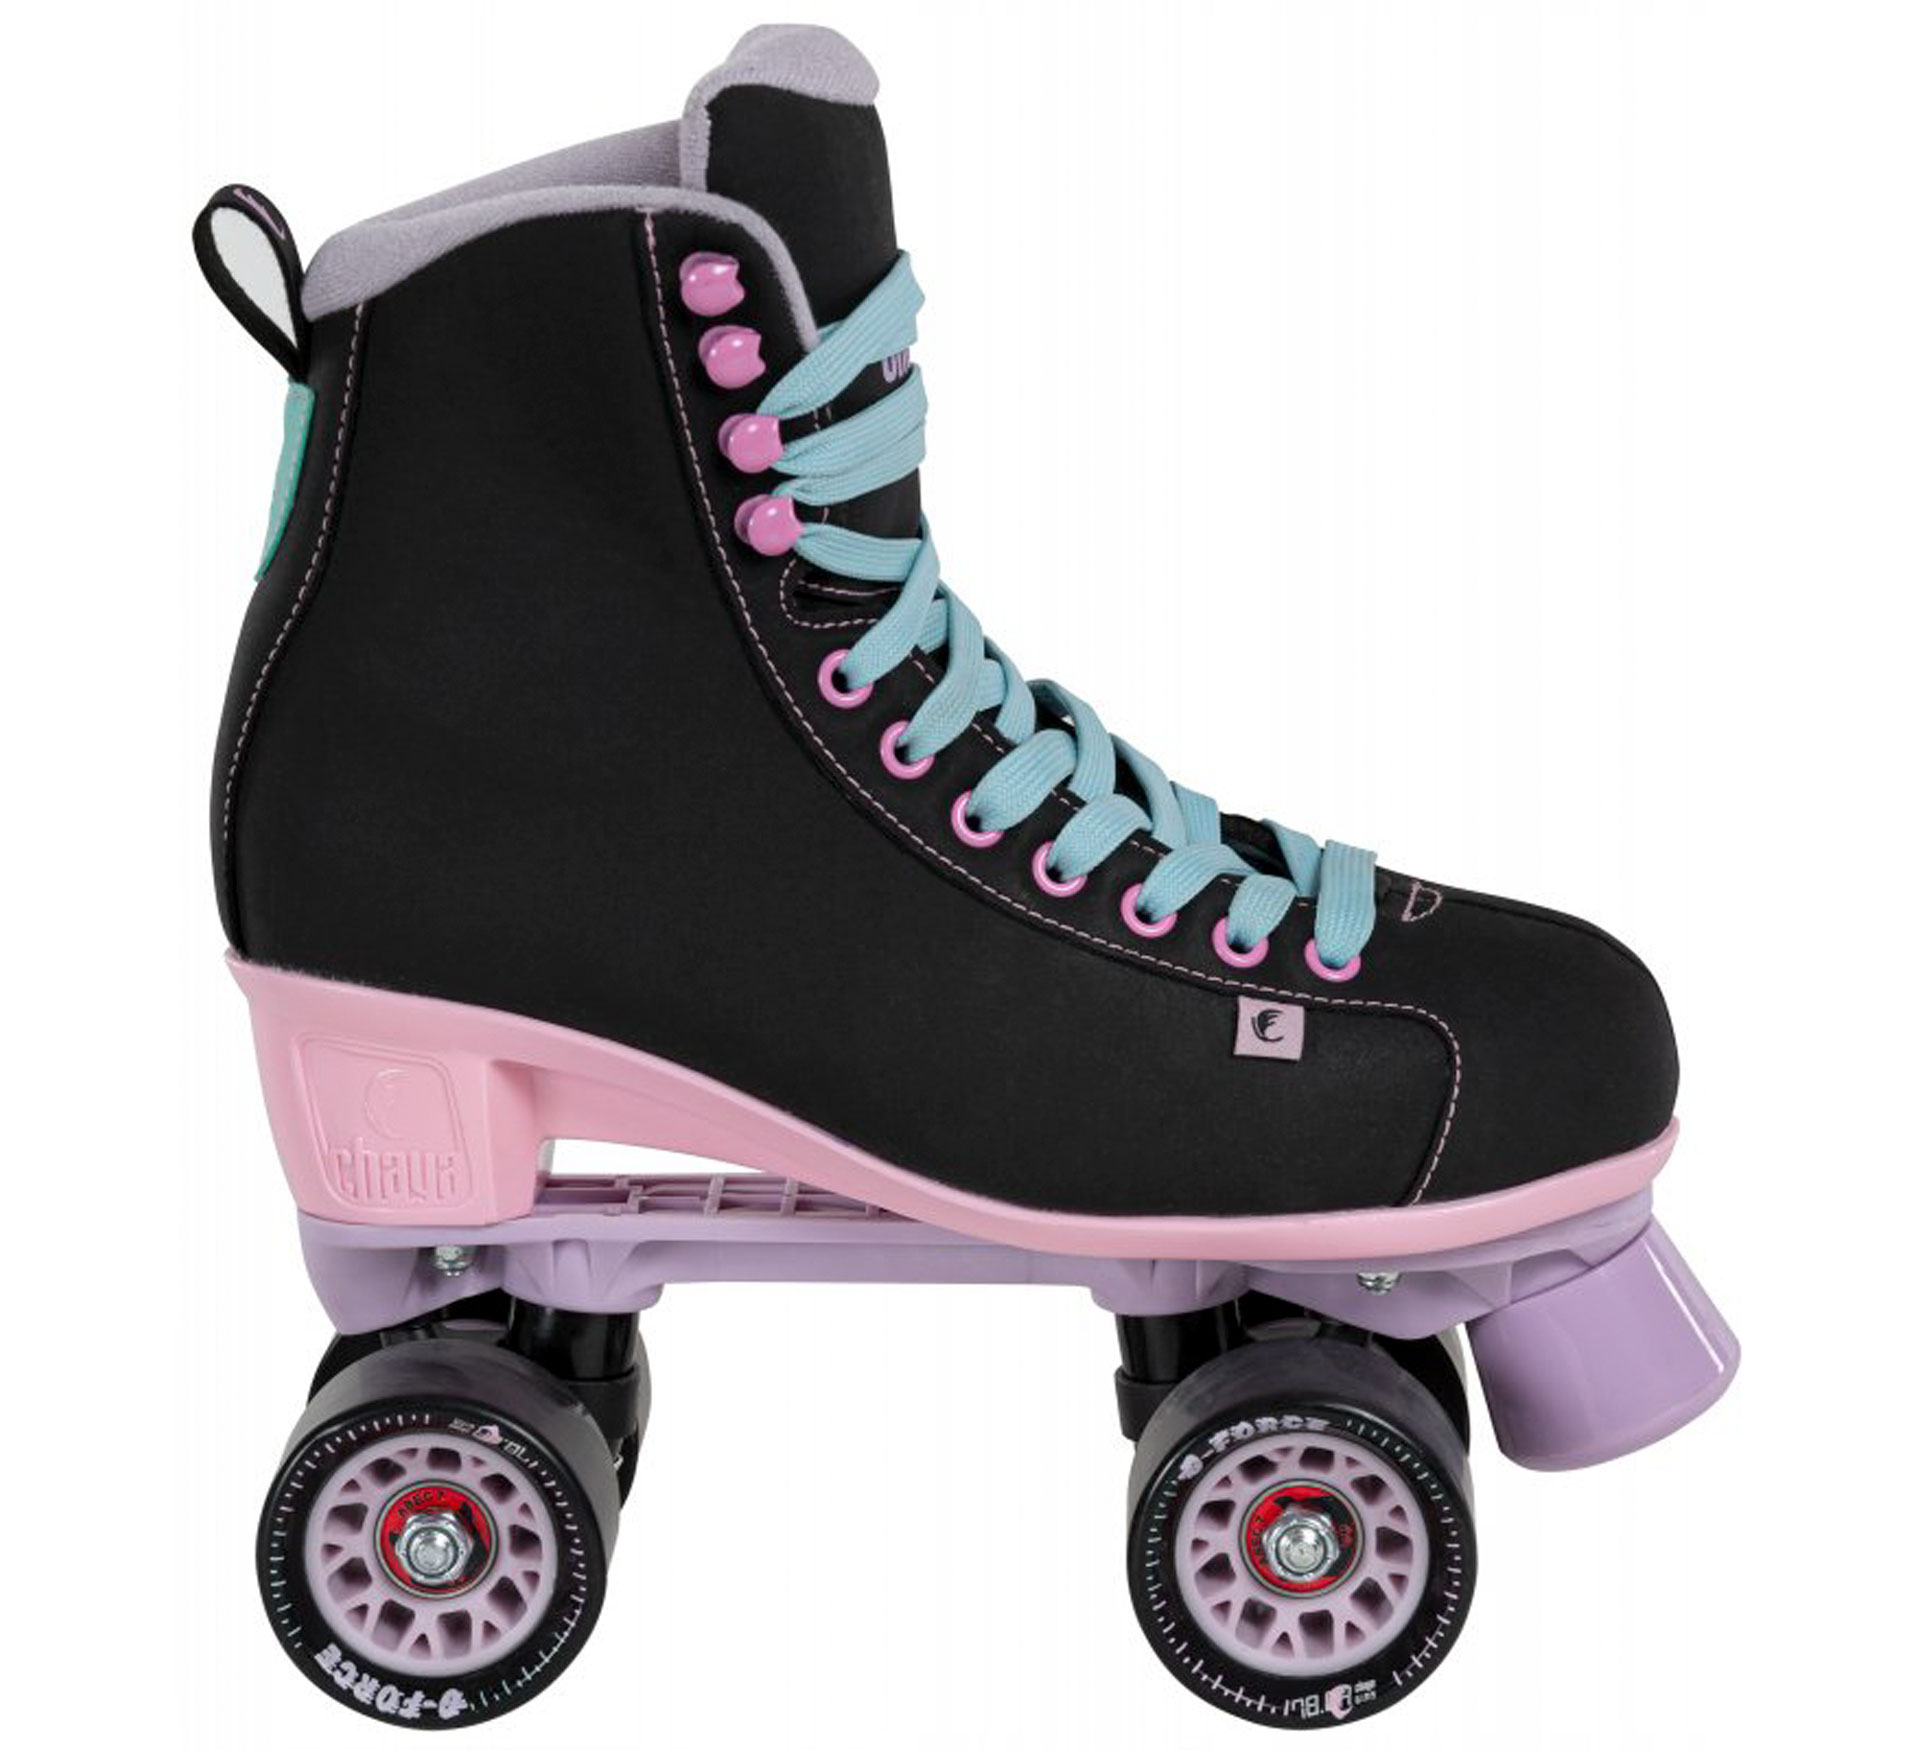 Patins à roulettes Chaya Lifestyle Melrose